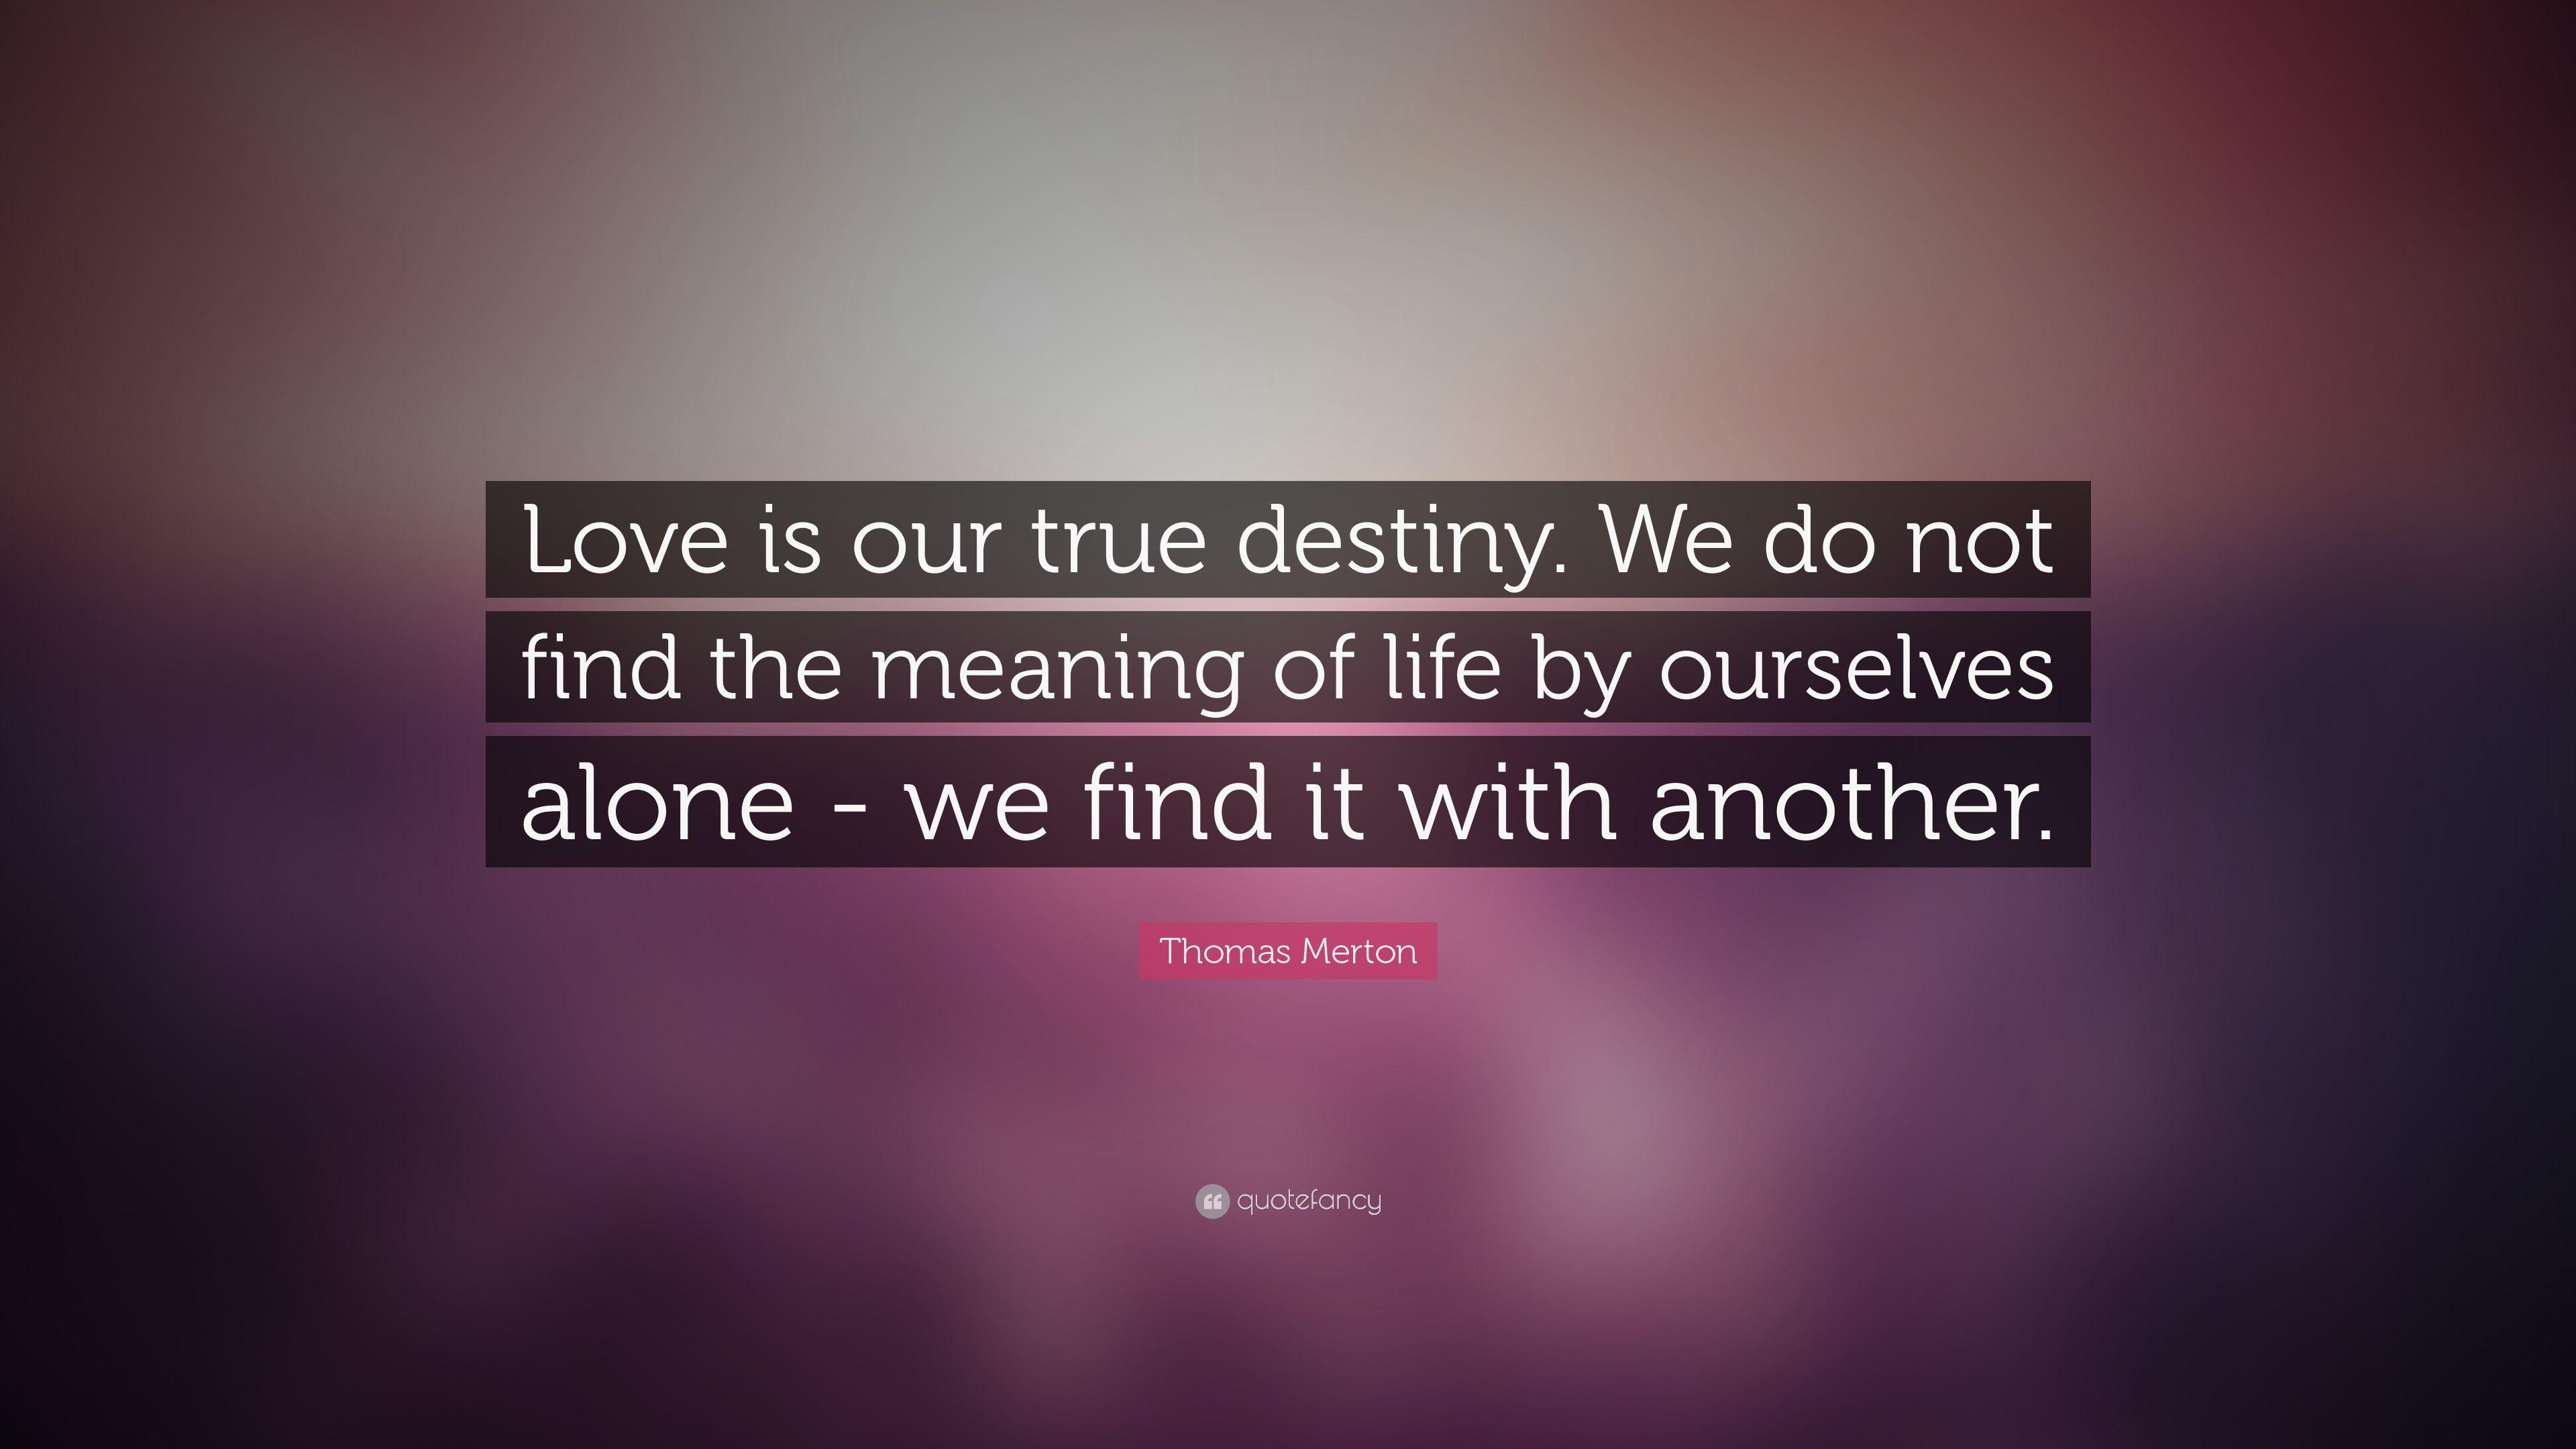 Thomas Merton Quote: “Love is our true destiny. We do not find